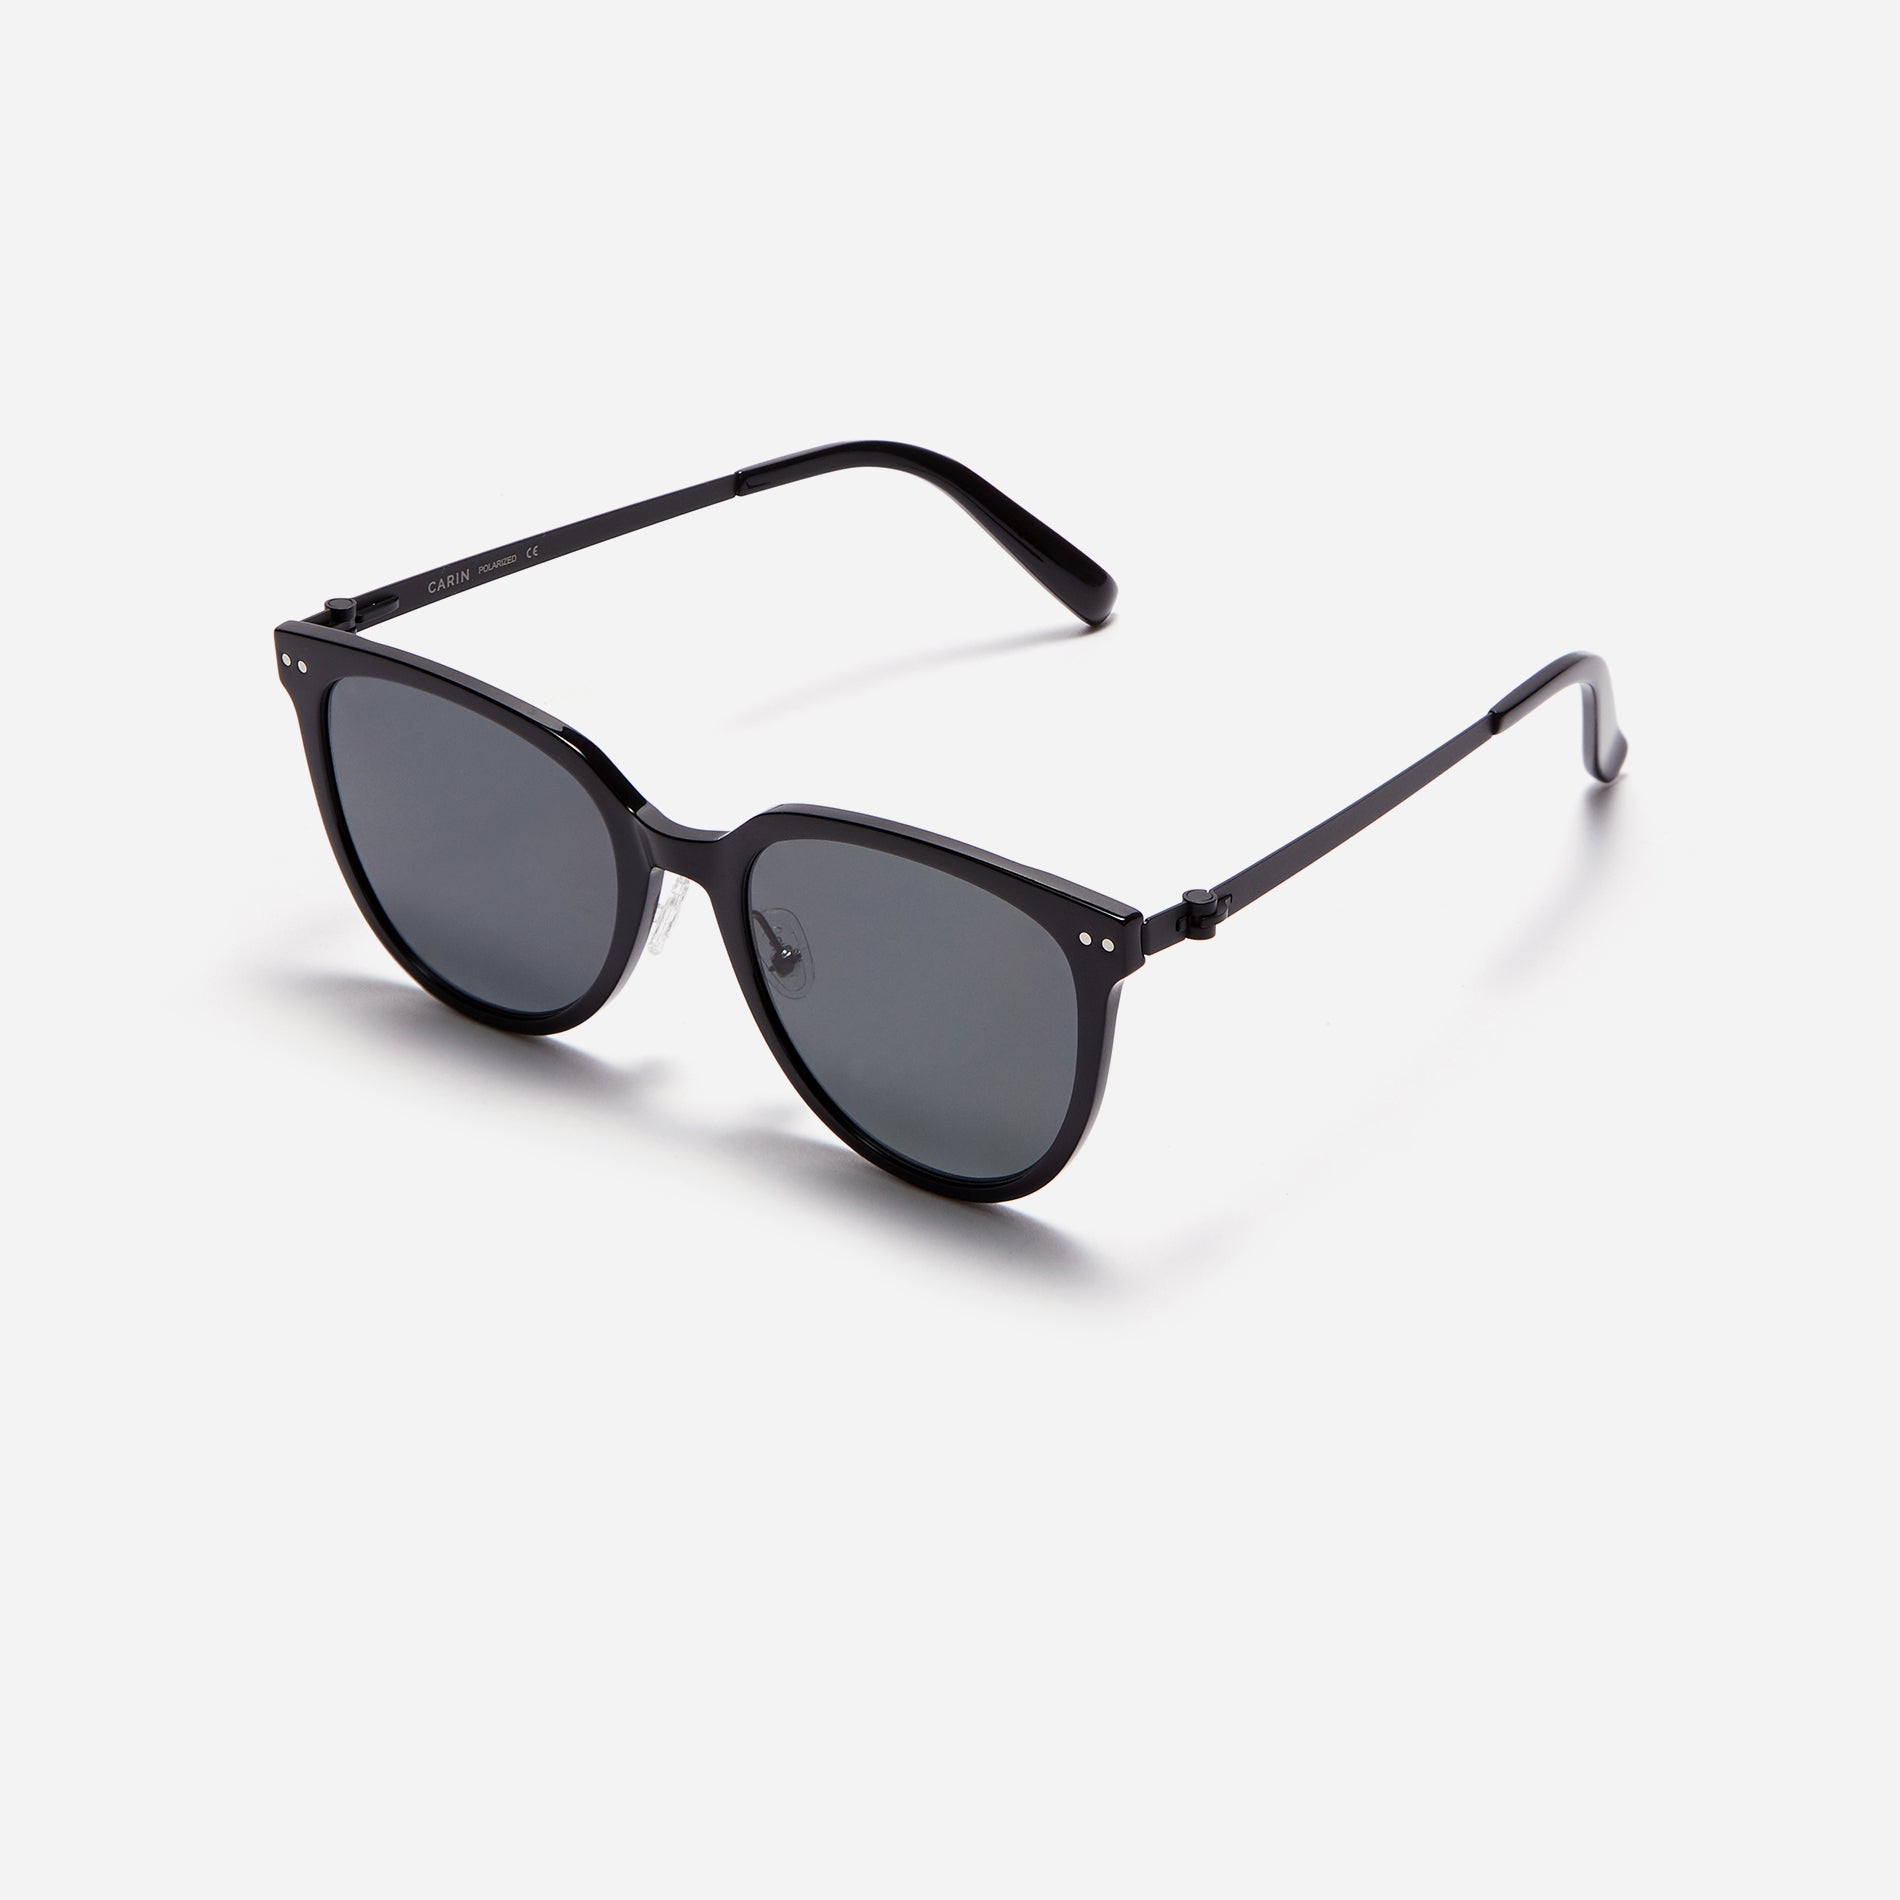 Round-shaped polarized sunglasses, representing CARIN’s POLARIZED line. Crafted from lightweight and durable bio-plastic to prevent slipping.